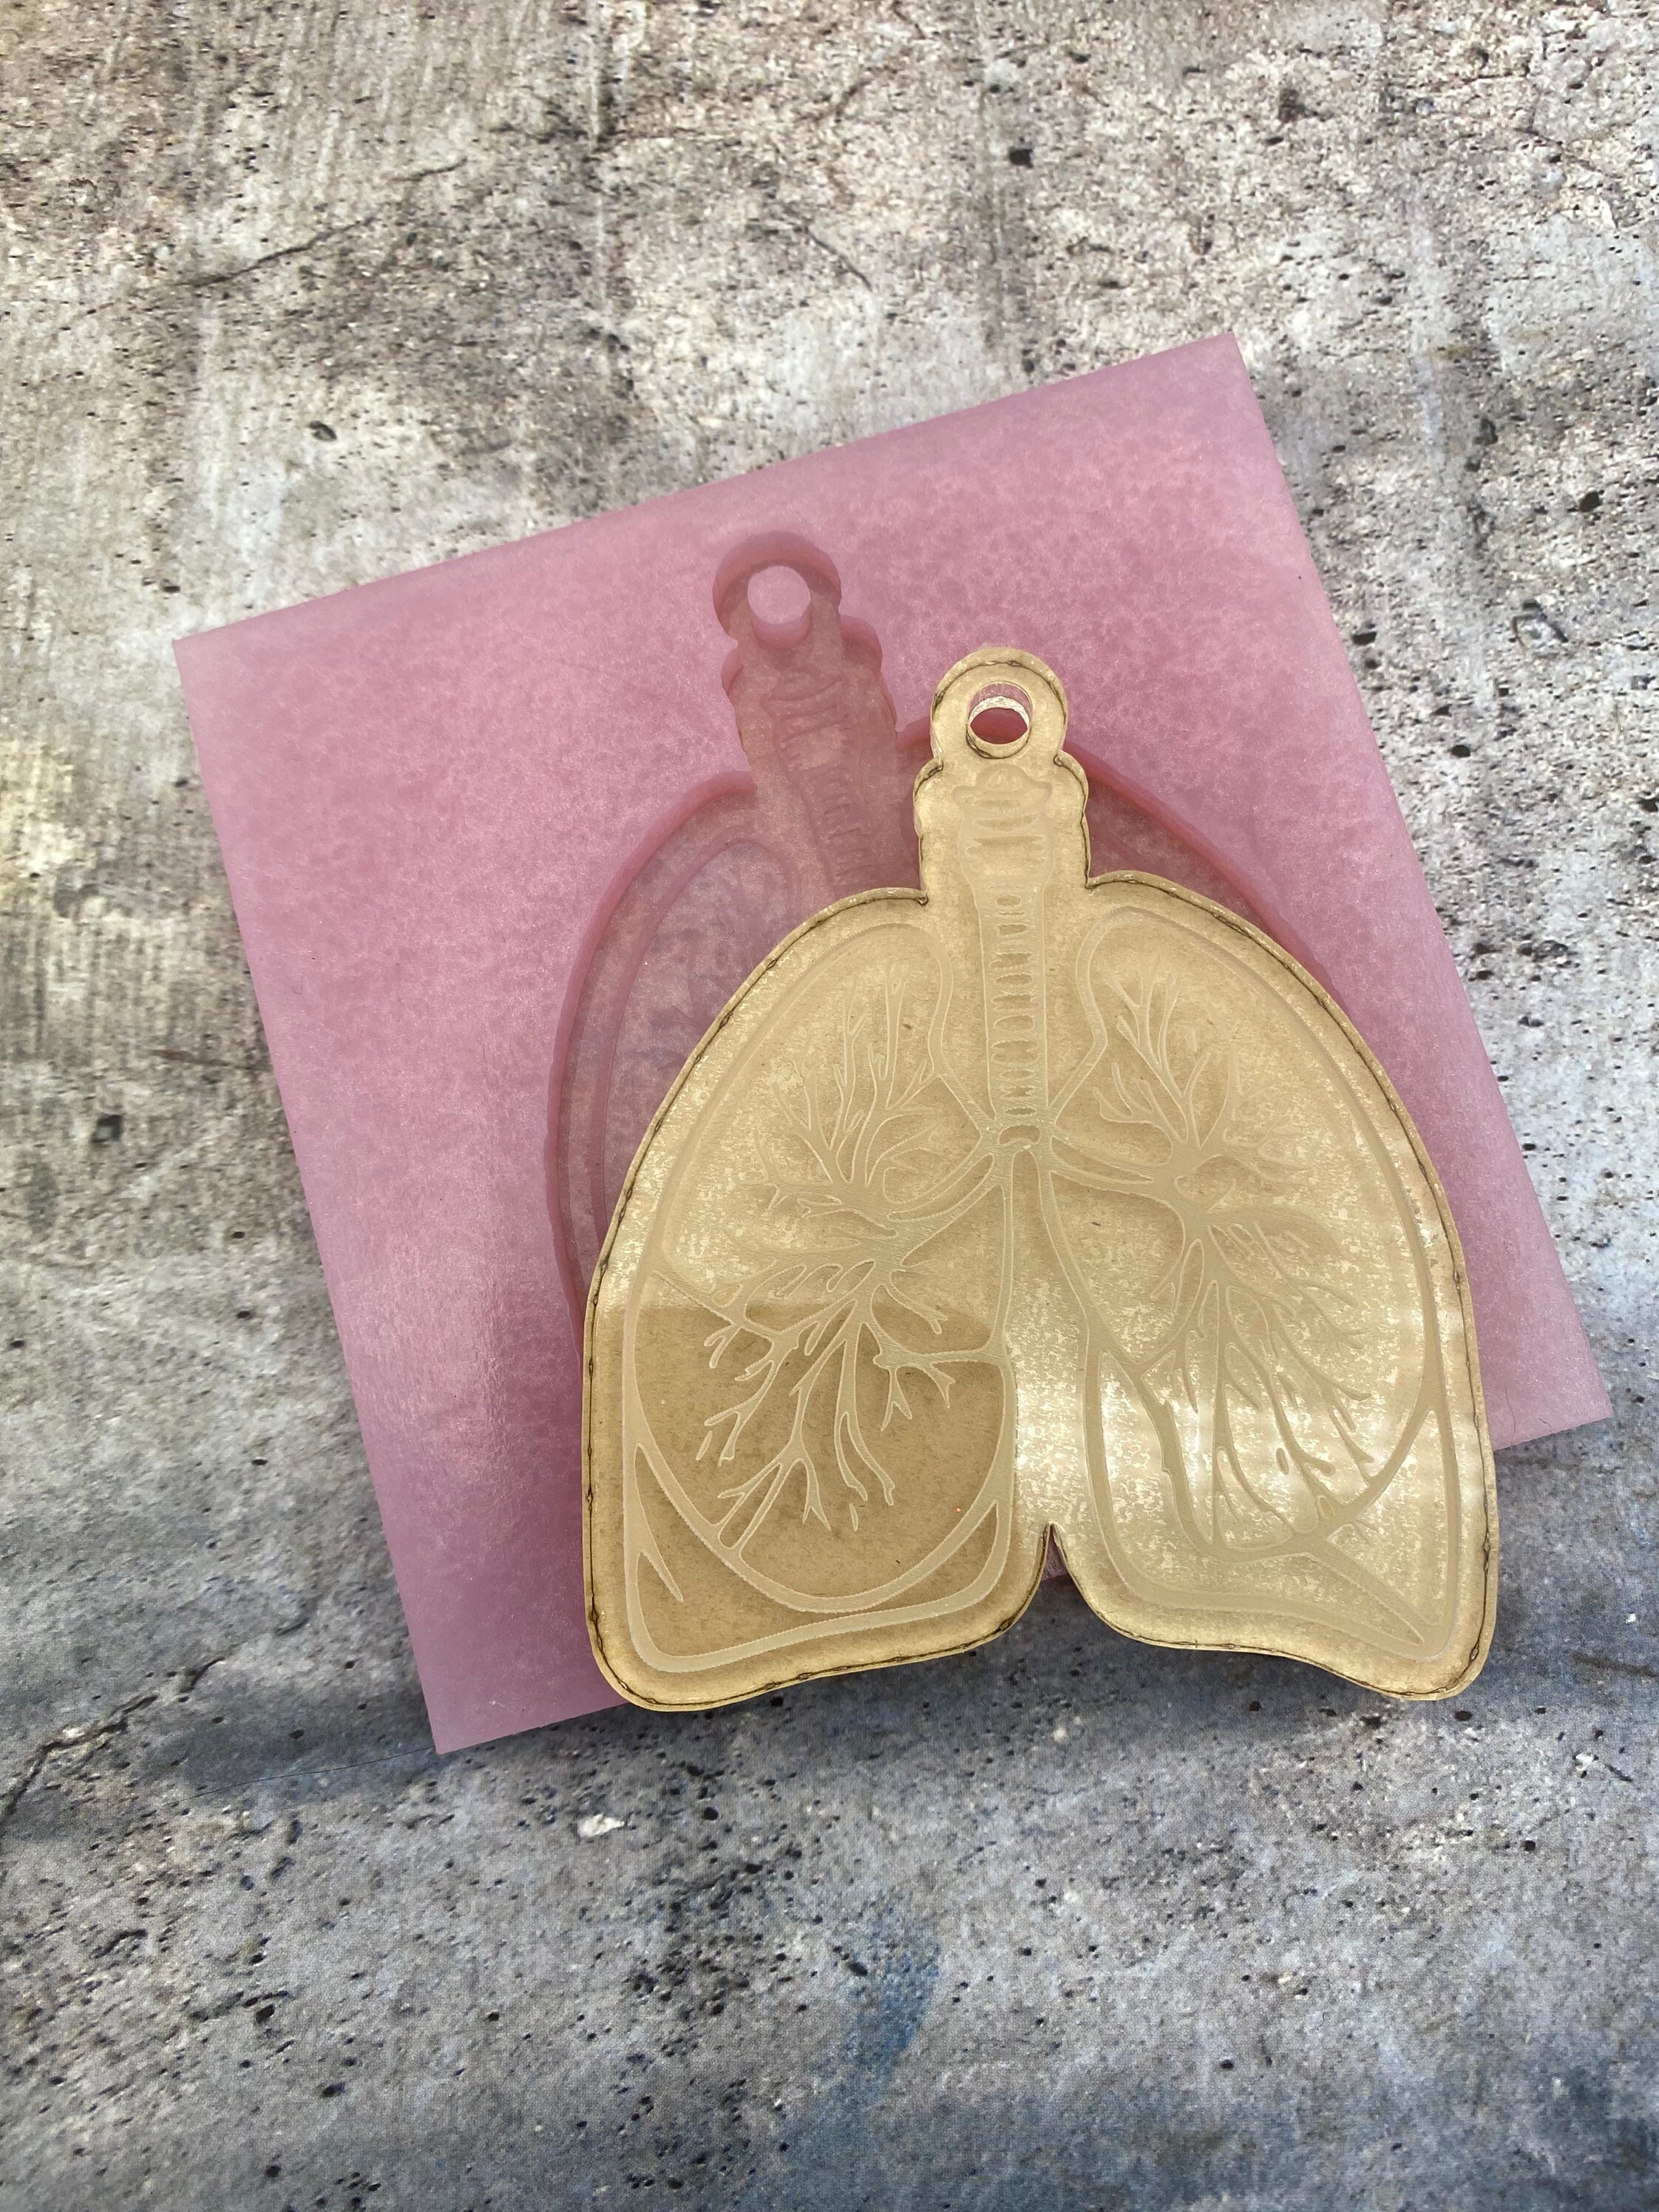 Anatomically Correct Lungs Mold Anatomical Lungs Engraved Silicone Mold Keychain Body Part Keychain Mold Molds Anatomical Resin Mold